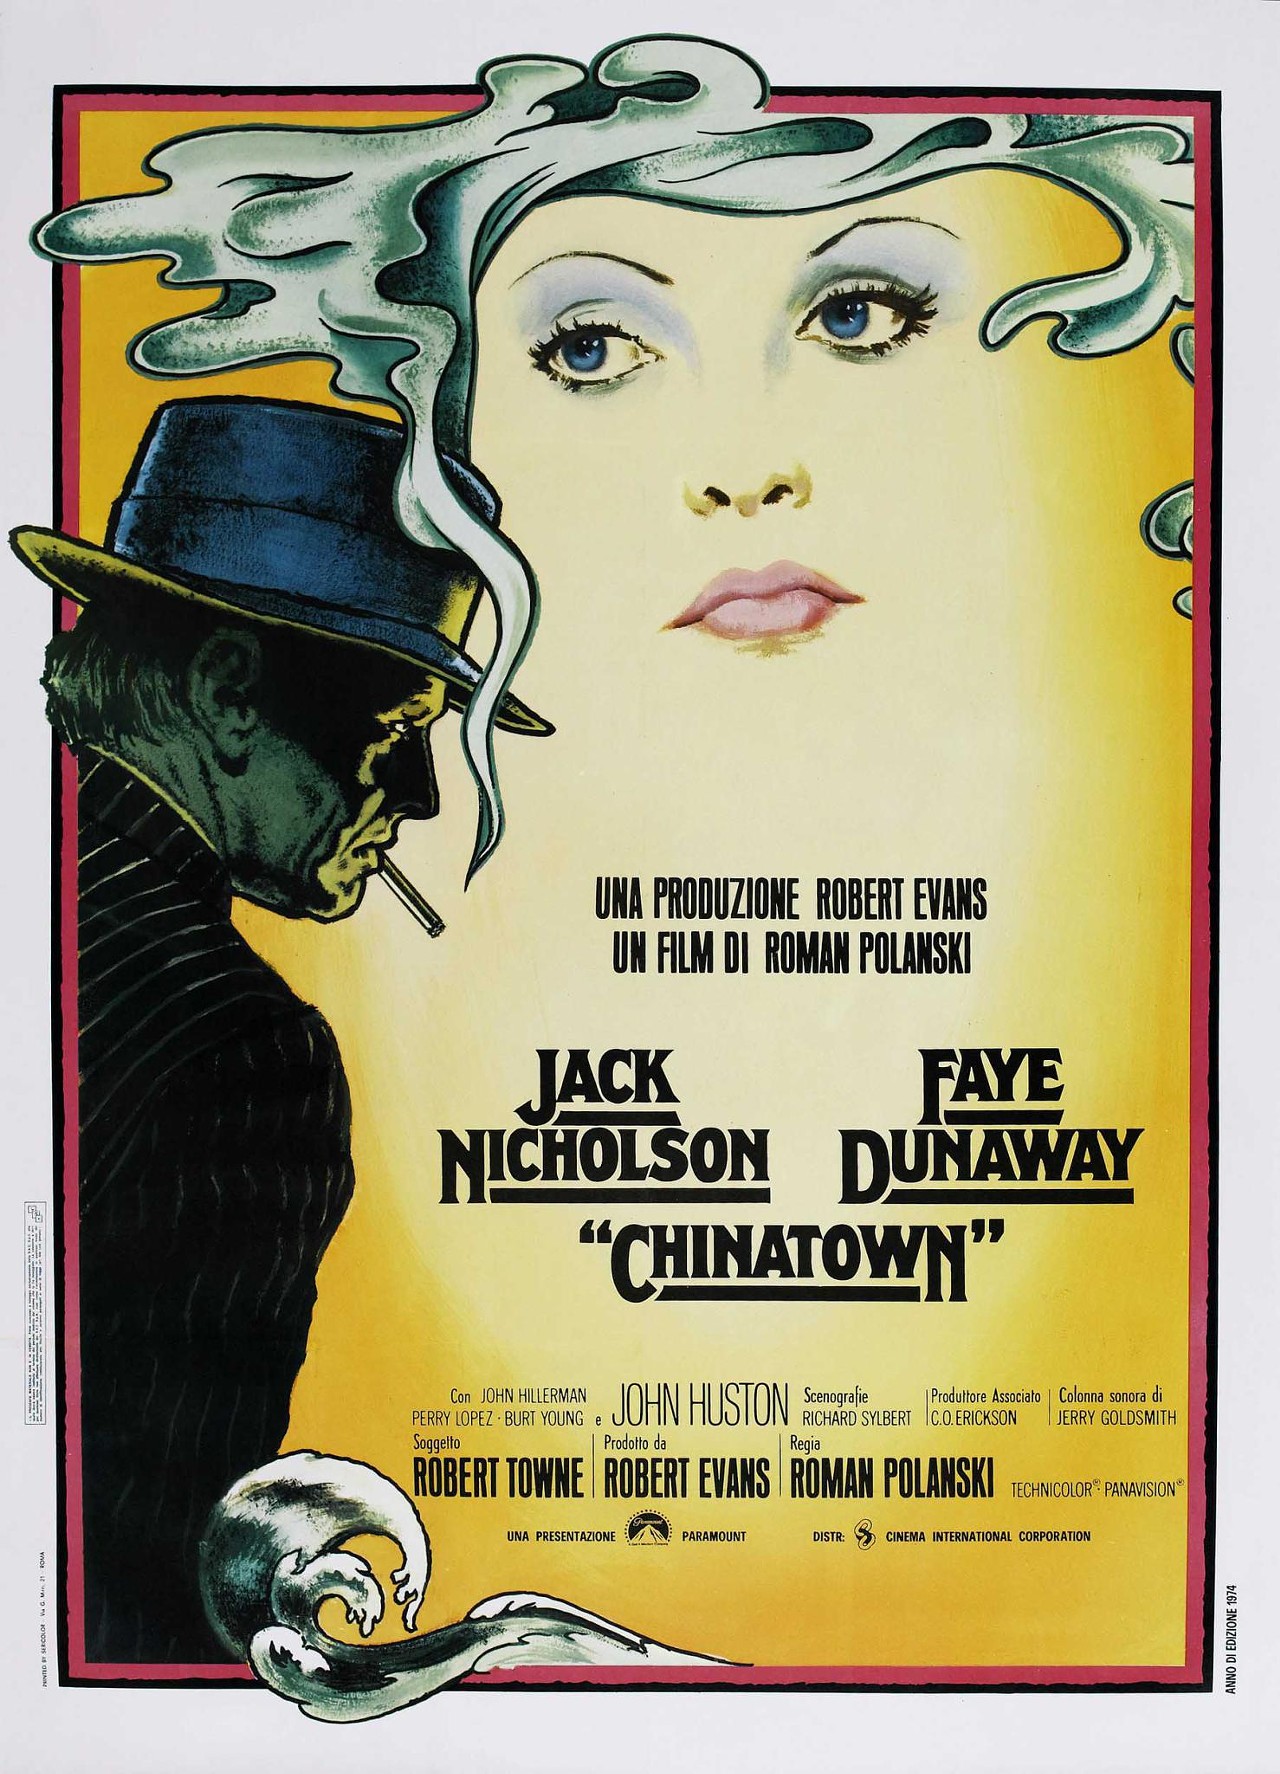 Chinatown (1974)
A private detective, Jake Gittes, hired to investigate an adultery case, stumbles on the plot of a murder involving incest and the privatization of water through state and municipal corruption, land use and real estate. If he doesn't drop the case at once he faces threats of legal action, but he pursues it anyway, slowly uncovering a vast conspiracy.